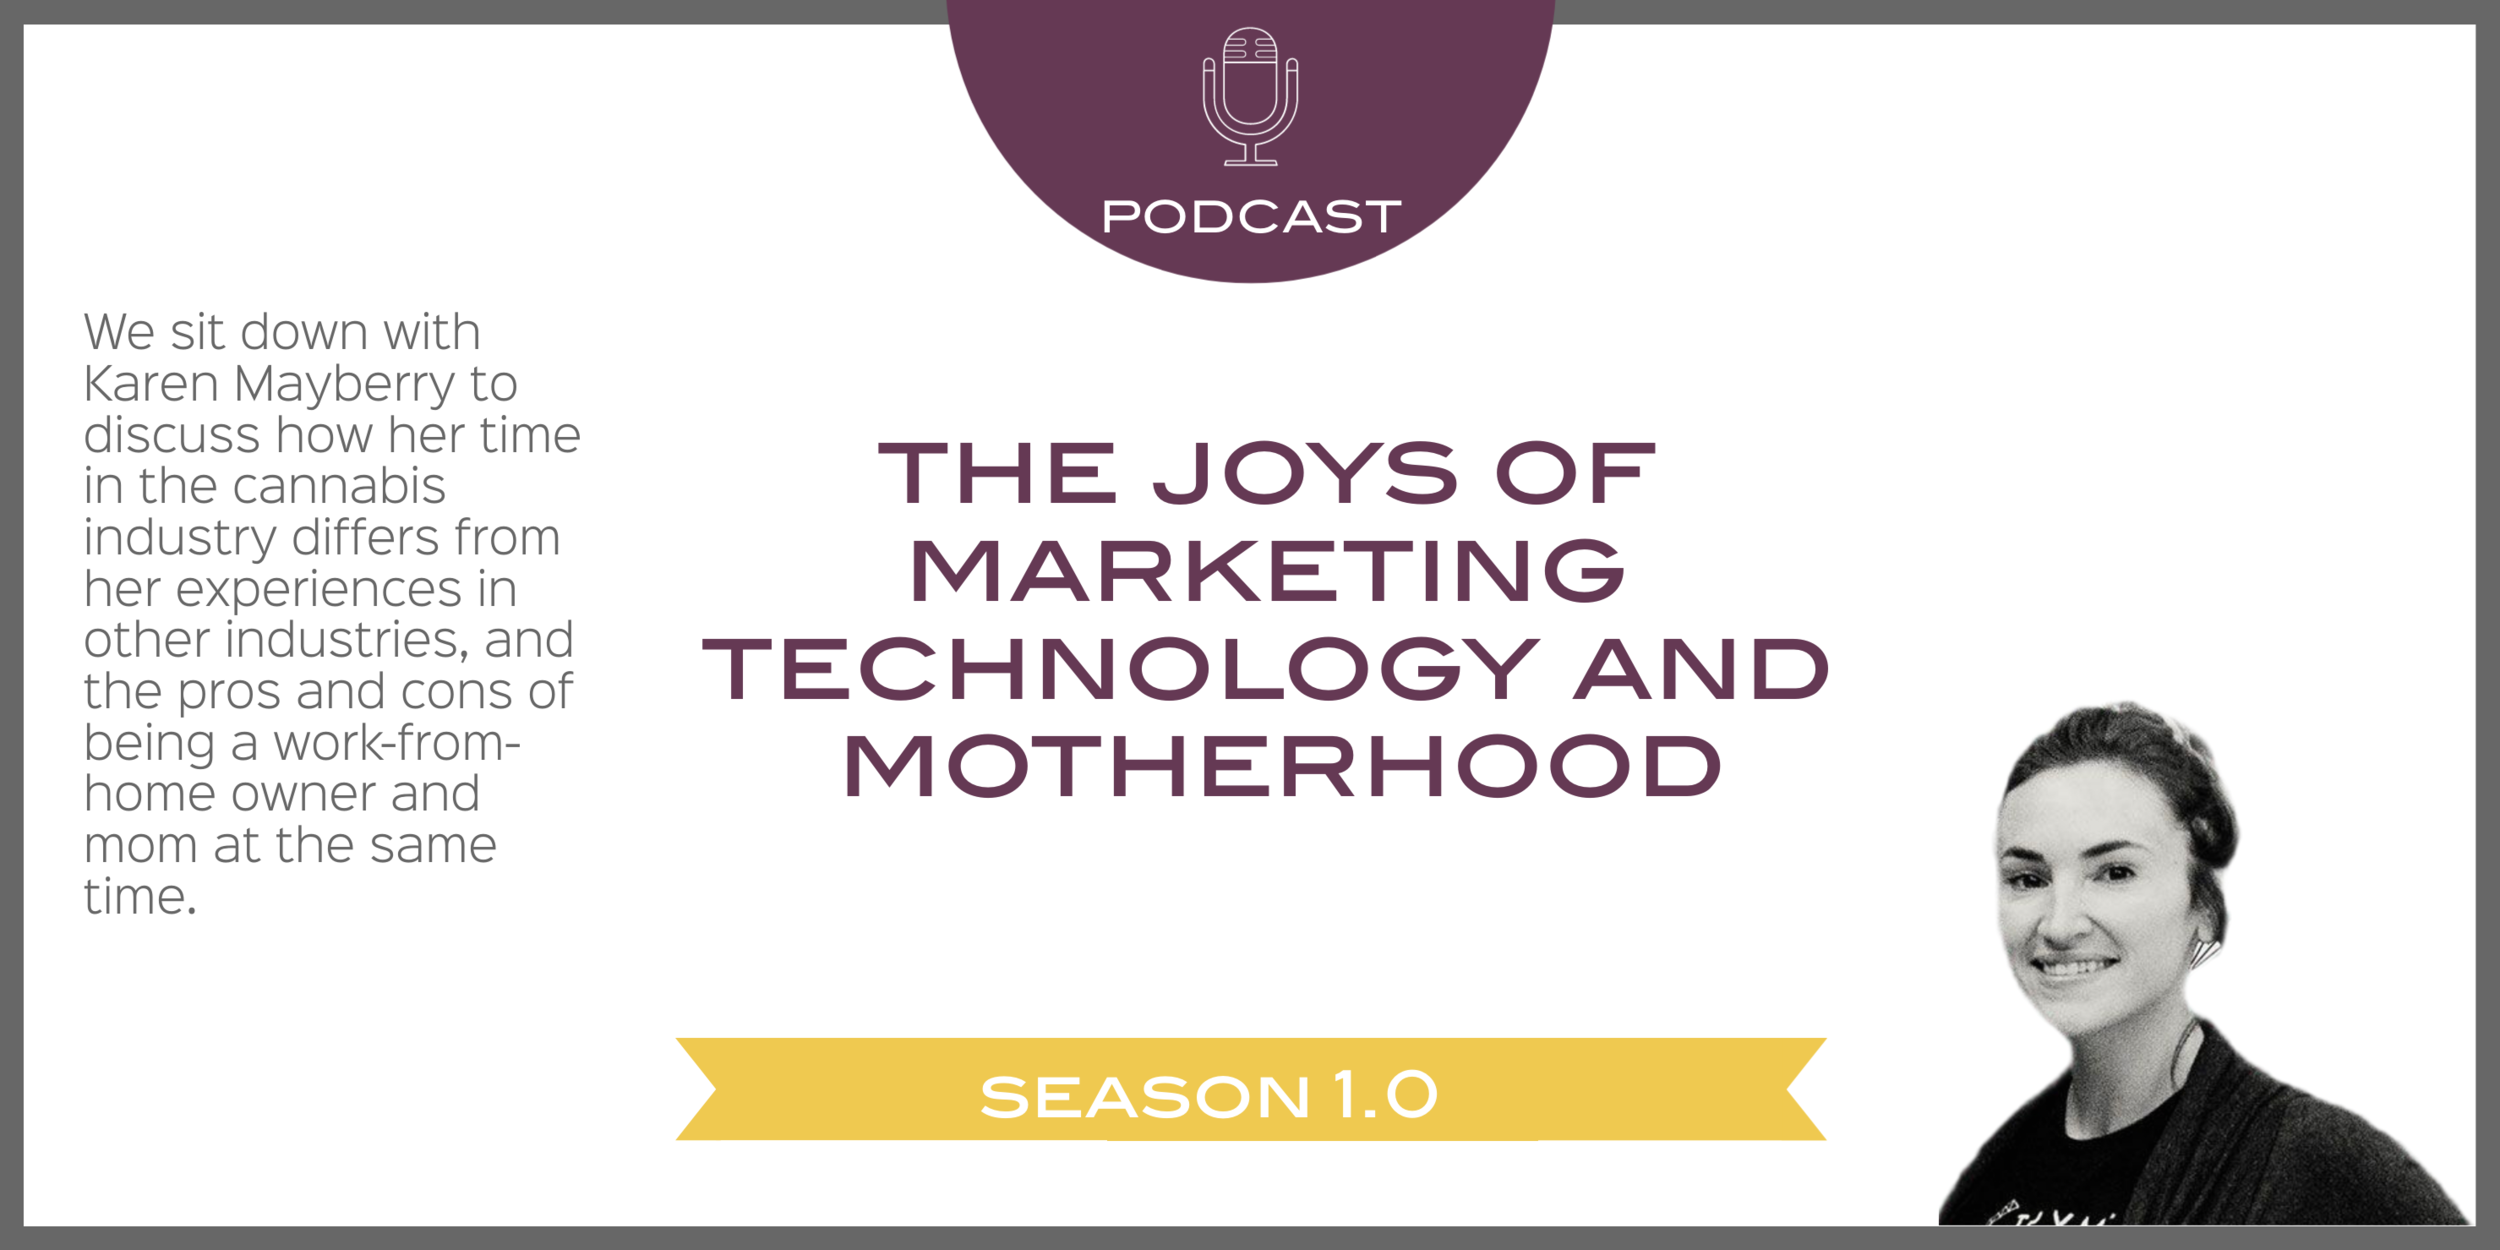 Karen Mayberry with Trym talks the joys of Marketing Technology and Motherhood